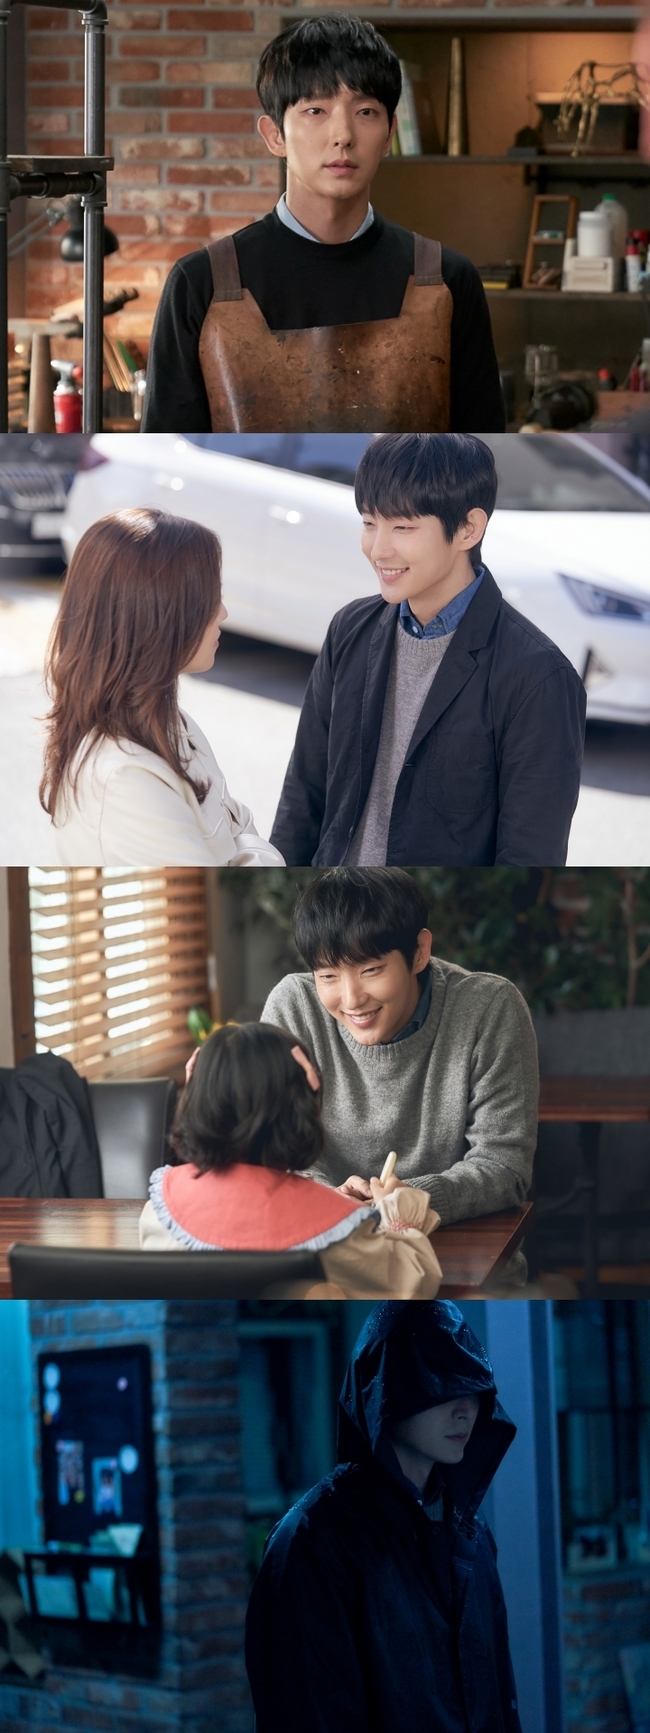 The first steel of Actor Lee Joon-gi, which shows the charm of the hot and cold () of the drama, was released.TVNs new tree drama The Flower of Evil showed Lee Joon-gis still cut on July 7.Lee Joon-gi divides into the metal crafter Baek Hee-seong, who lives a normal life in the play.Baek Hee-seong, who runs the workshop, is a family husband who is good at living and childcare for his wife, a detective, and a father who is more affectionate to his daughter, Baek Eun-ha (Jeong Seo-yeon).But he is hiding the secrets that have made extraordinary efforts to maintain this ordinary life.For a long time I have been working together, I have hidden my past and real identity and have been acting as love.So, when I turn around with a warm smile in front of my wife and daughter, I wonder about the transformation of Lee Joon-gi, who will perfectly draw the temperature difference, foreshadowing the extreme with a cold expression.In particular, he will express the polyhedron of the person in three dimensions, from the melodrama, paternal love, and suspense from the cool eye change to show through the couples act with Moon Chae-won (Cha Ji-won).In addition, the unpredictable development begins as one day is suspected as a suspect in a murder case.Expectations are soaring in the hot performance of Lee Joon-gi, who will lead the play in a balanced manner through the character Baek Hee-seong at the center of the elaborate mystery.Lee Joon-gi is full of passion and energy outside the camera, but in the camera, he erases the name Lee Joon-gi and is thoroughly immersed in the Baek Hee-seong.We will be able to meet Acting, such as Melody, Suspense, and Action, such as Lee Joon-gis comprehensive gift set, he said. All Actors and staff are shooting hard, so I would like to ask for your expectations and interest.The Flower of Evil will be broadcast for the first time at 10:50 p.m. on the 29th.